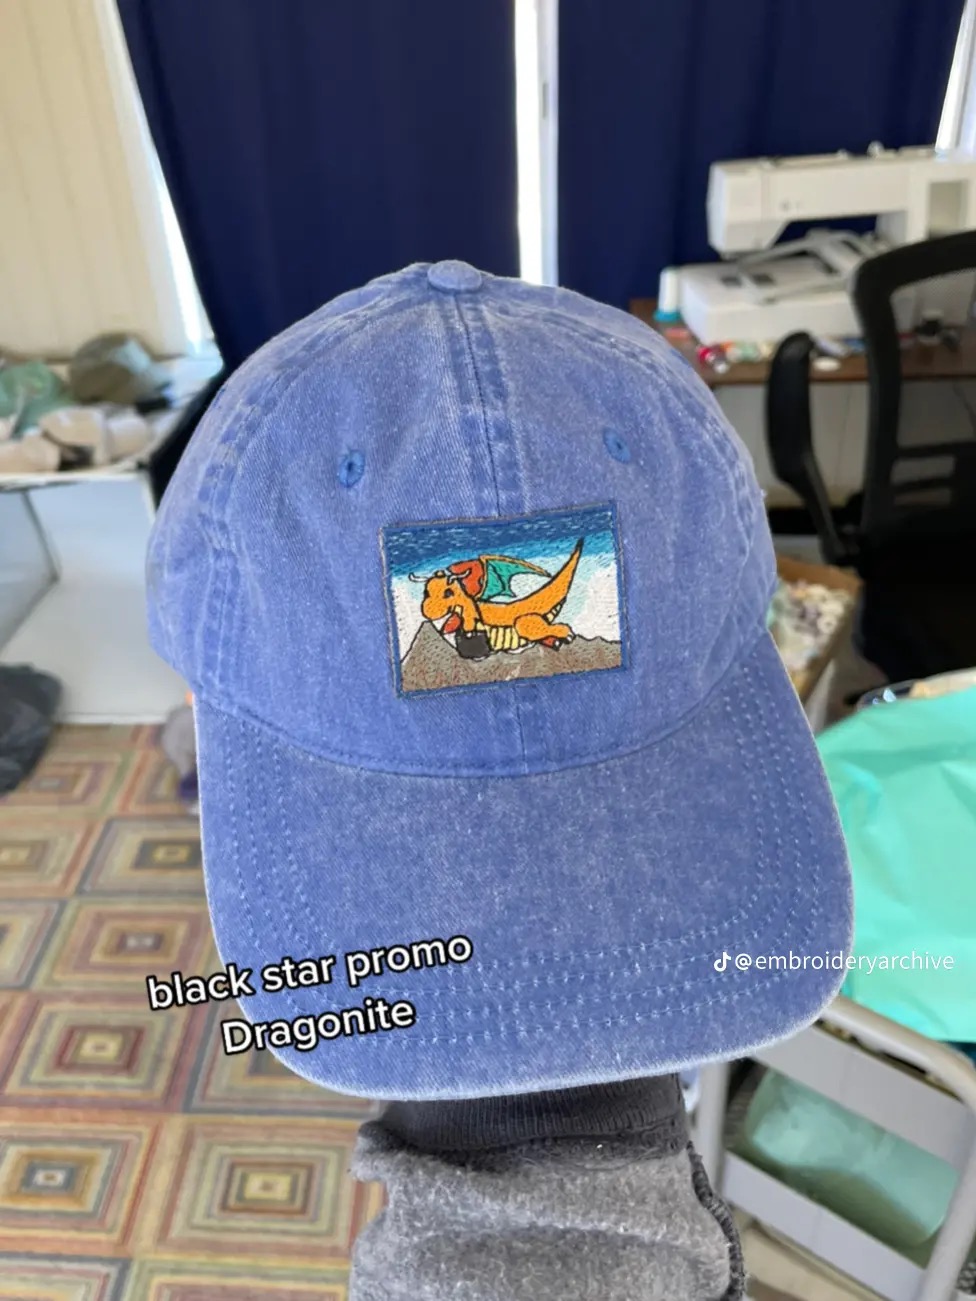 I saw some very cool hats embroidered with card art - General